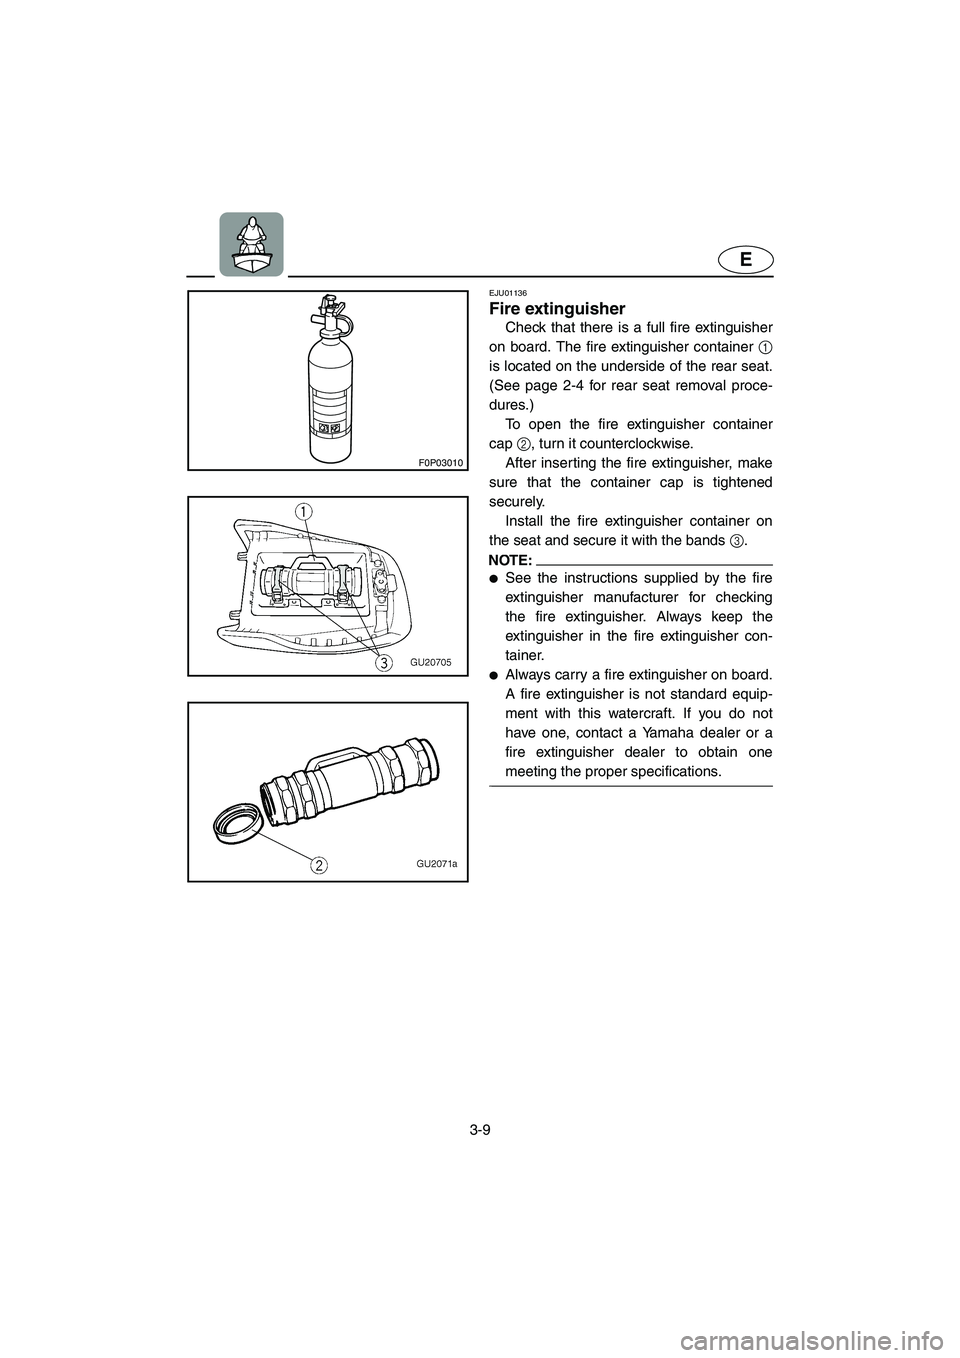 YAMAHA XL 700 2003  Owners Manual 3-9
E
F0P03010
EJU01136 
Fire extinguisher  
Check that there is a full fire extinguisher
on board. The fire extinguisher container 1
is located on the underside of the rear seat.
(See page 2-4 for re